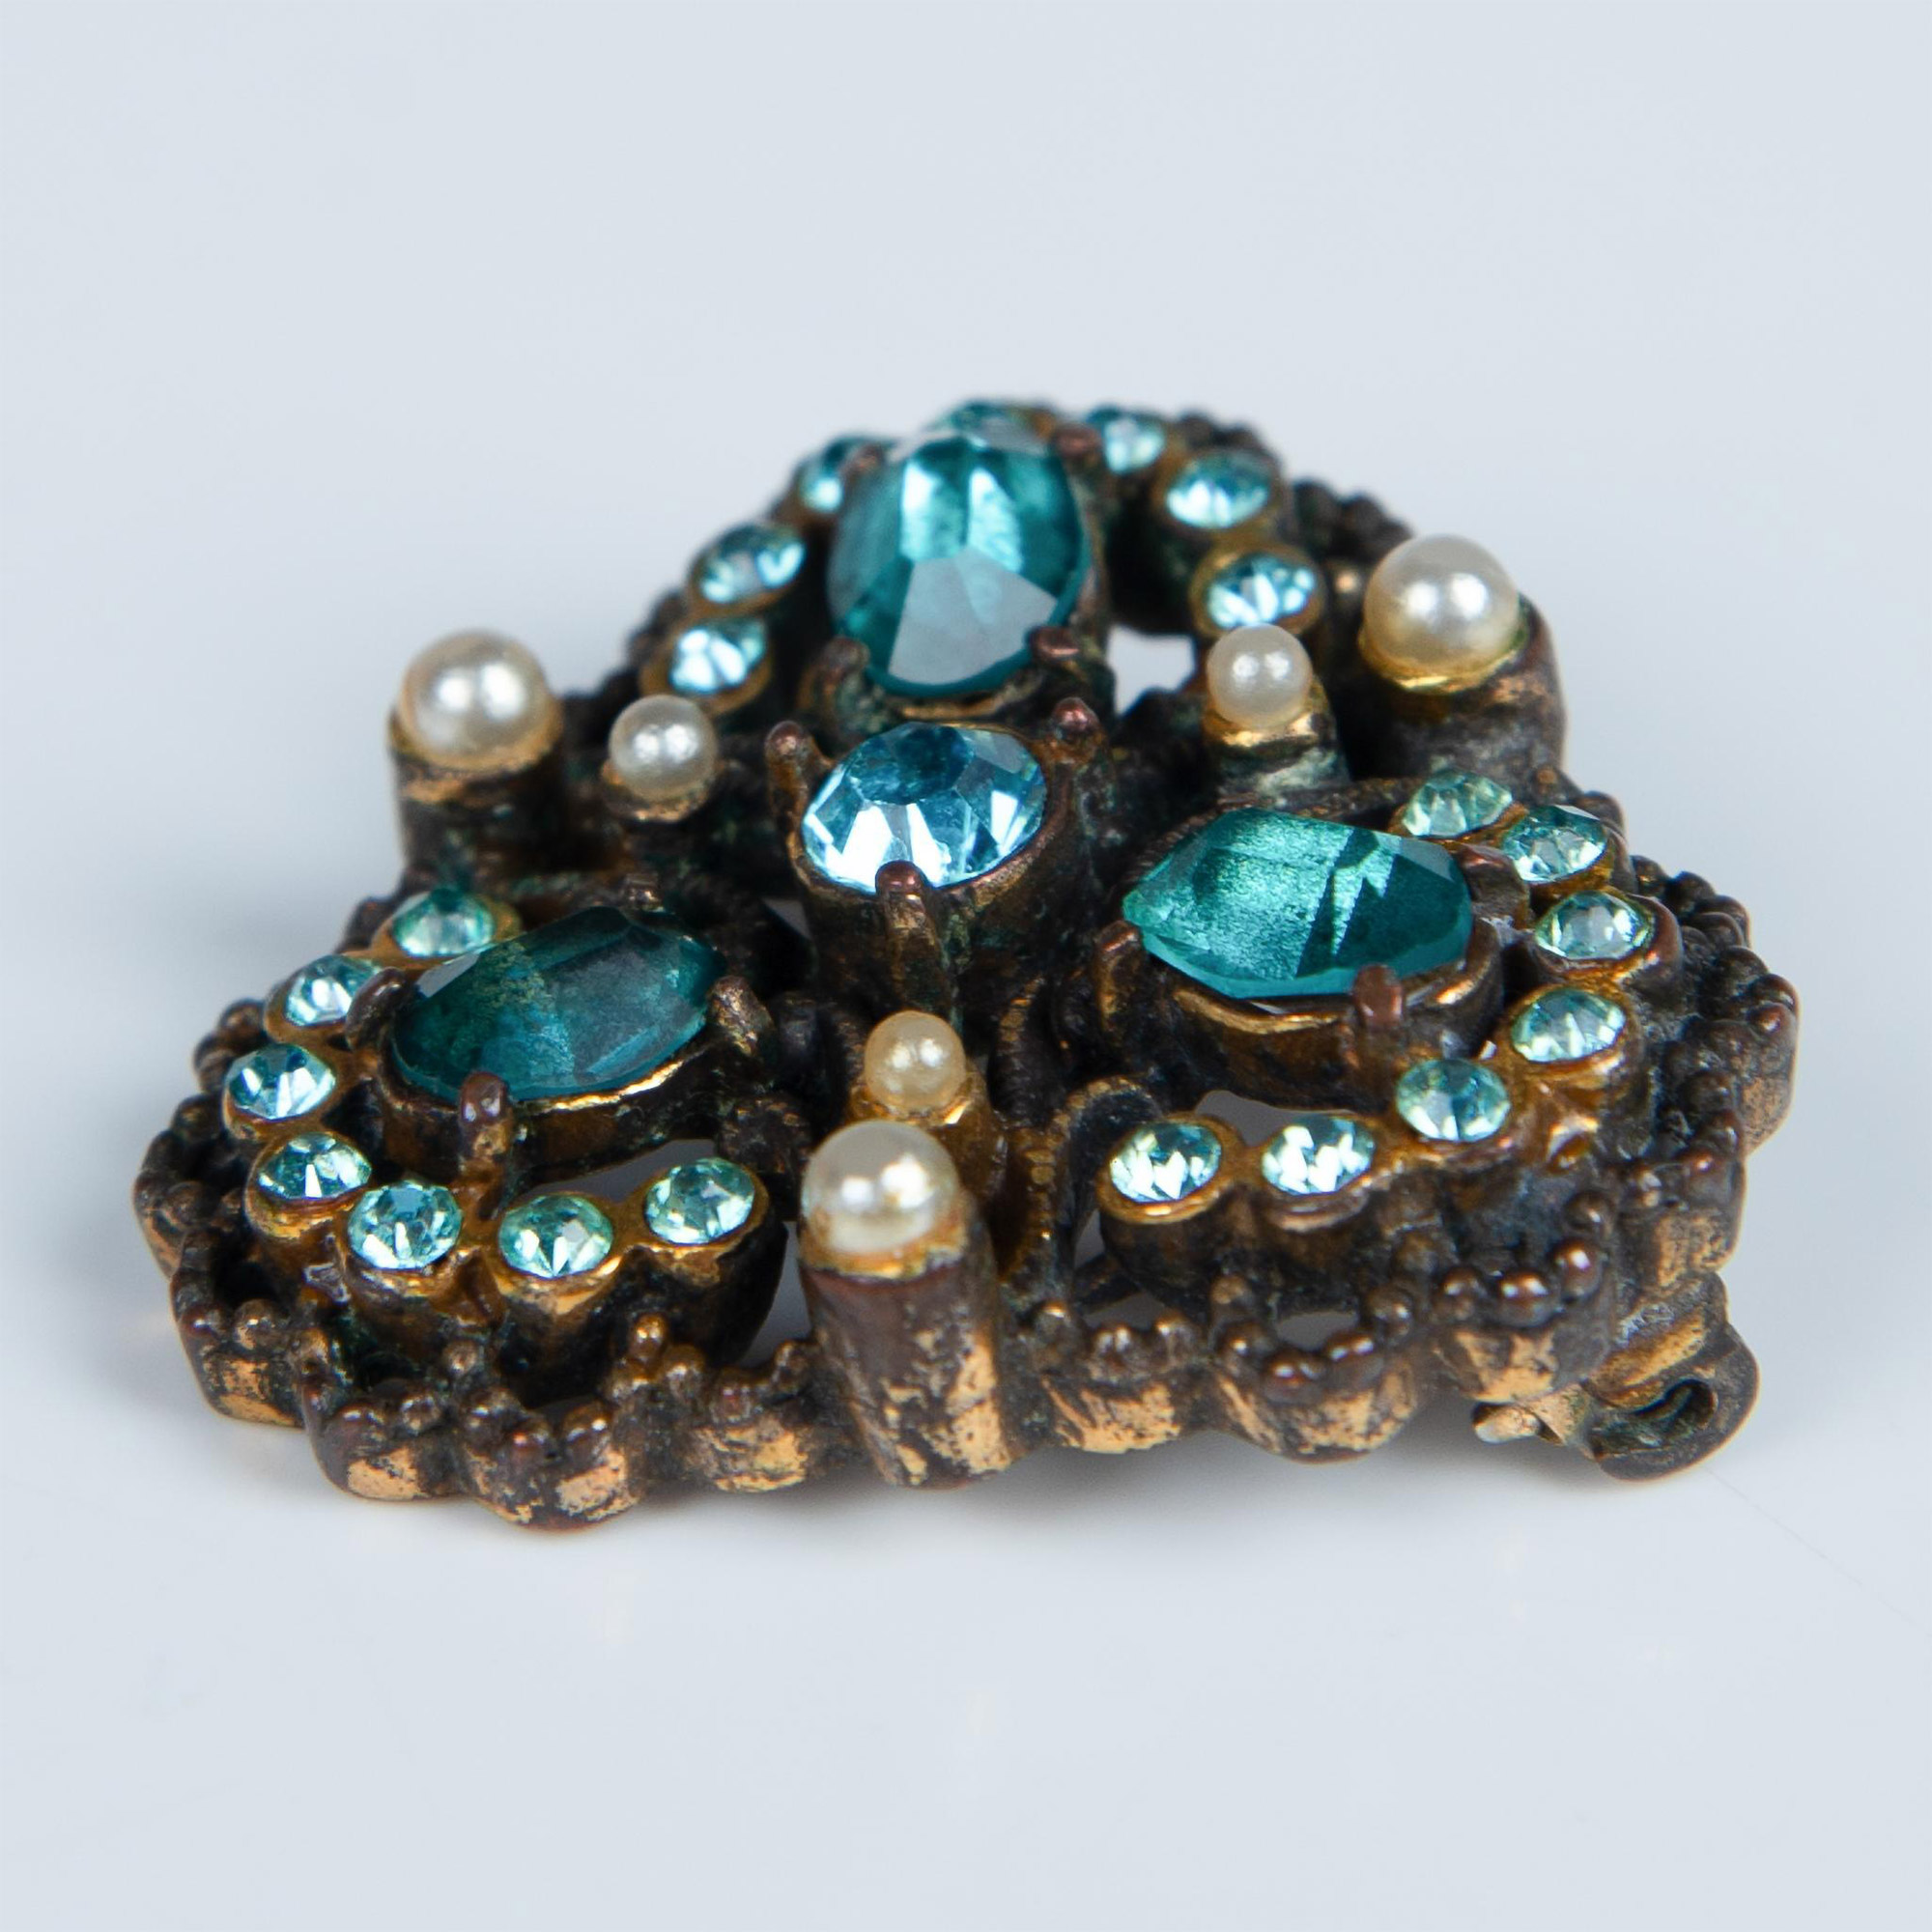 Vintage Small Blue Rhinestone and Faux Pearl Brooch - Image 3 of 3